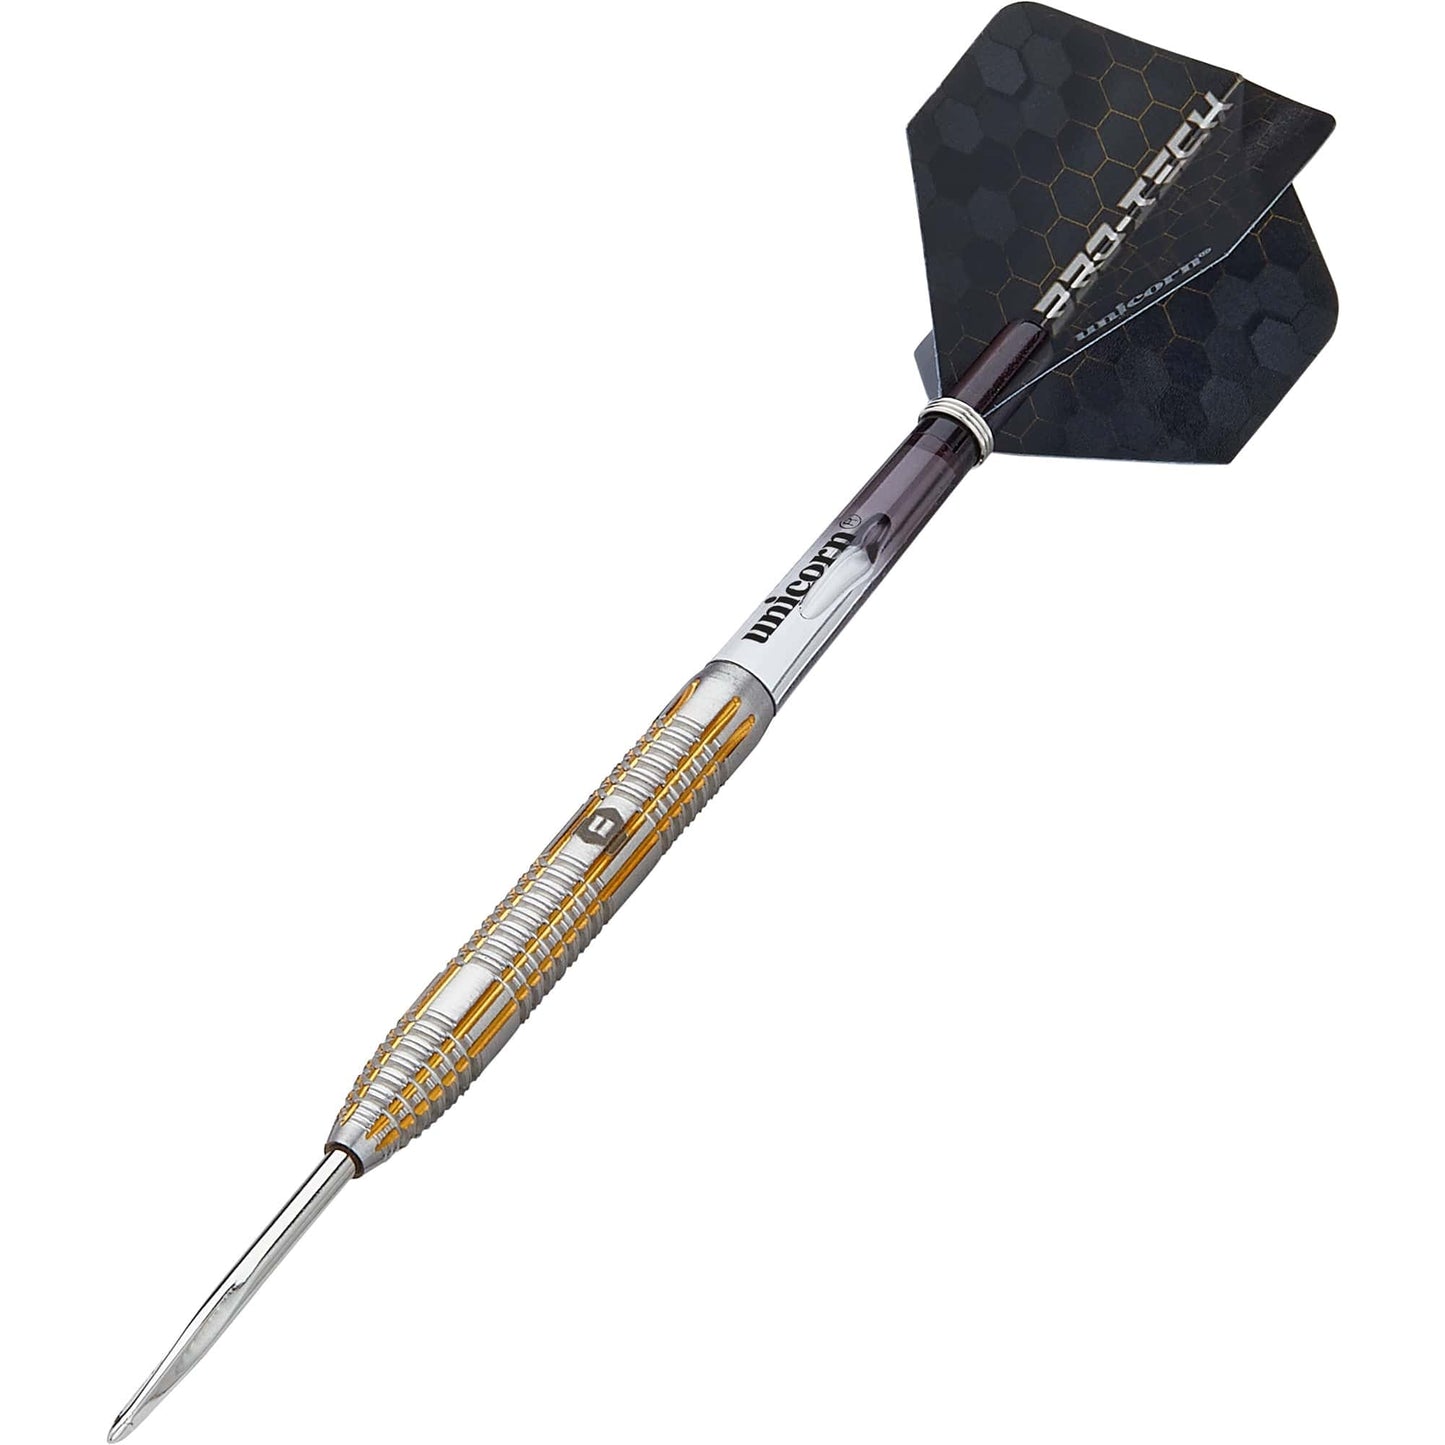 Unicorn Protech Darts - Style 4 - Steel Tip - Gold Ring